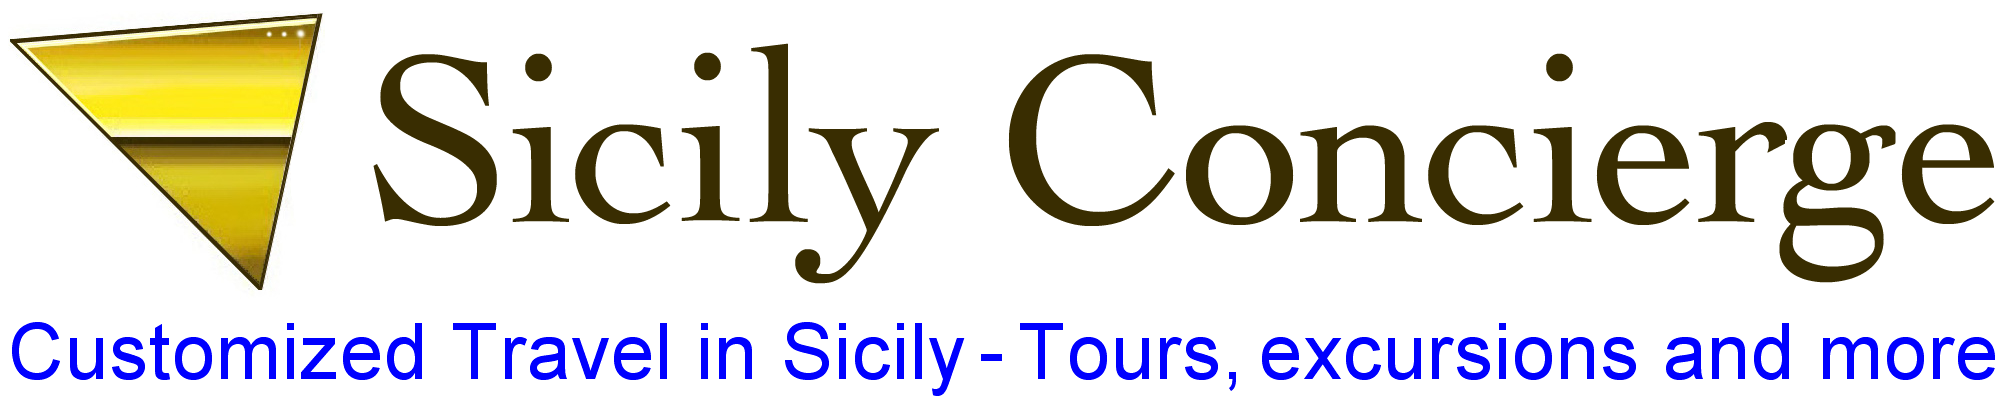 Personalized travel services in Sicily.